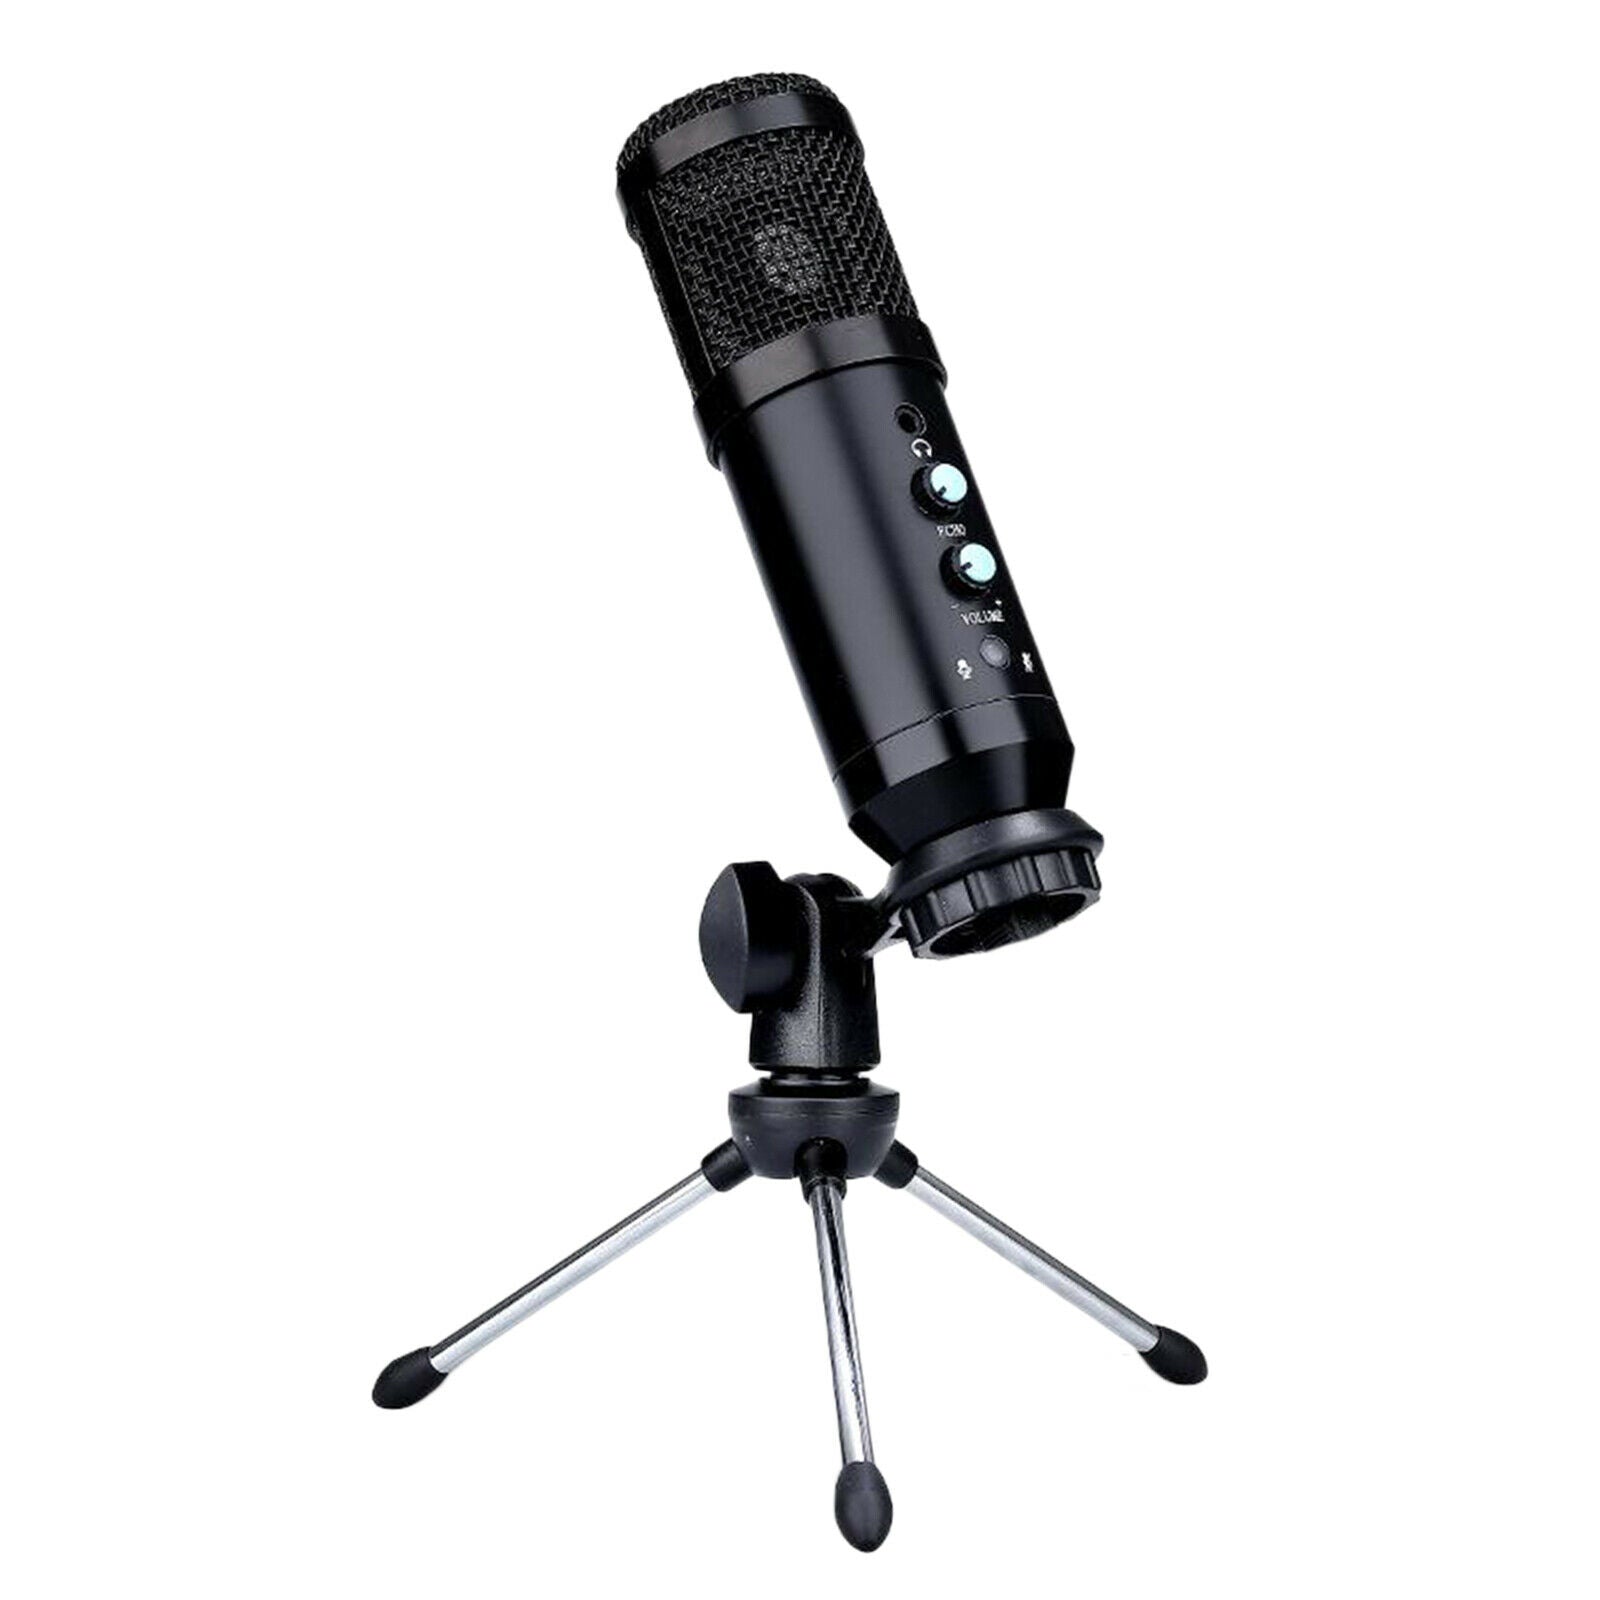 192KHZ/24BIT Recording Condenser Microphone Kit Cardioid Mic for Podcasting